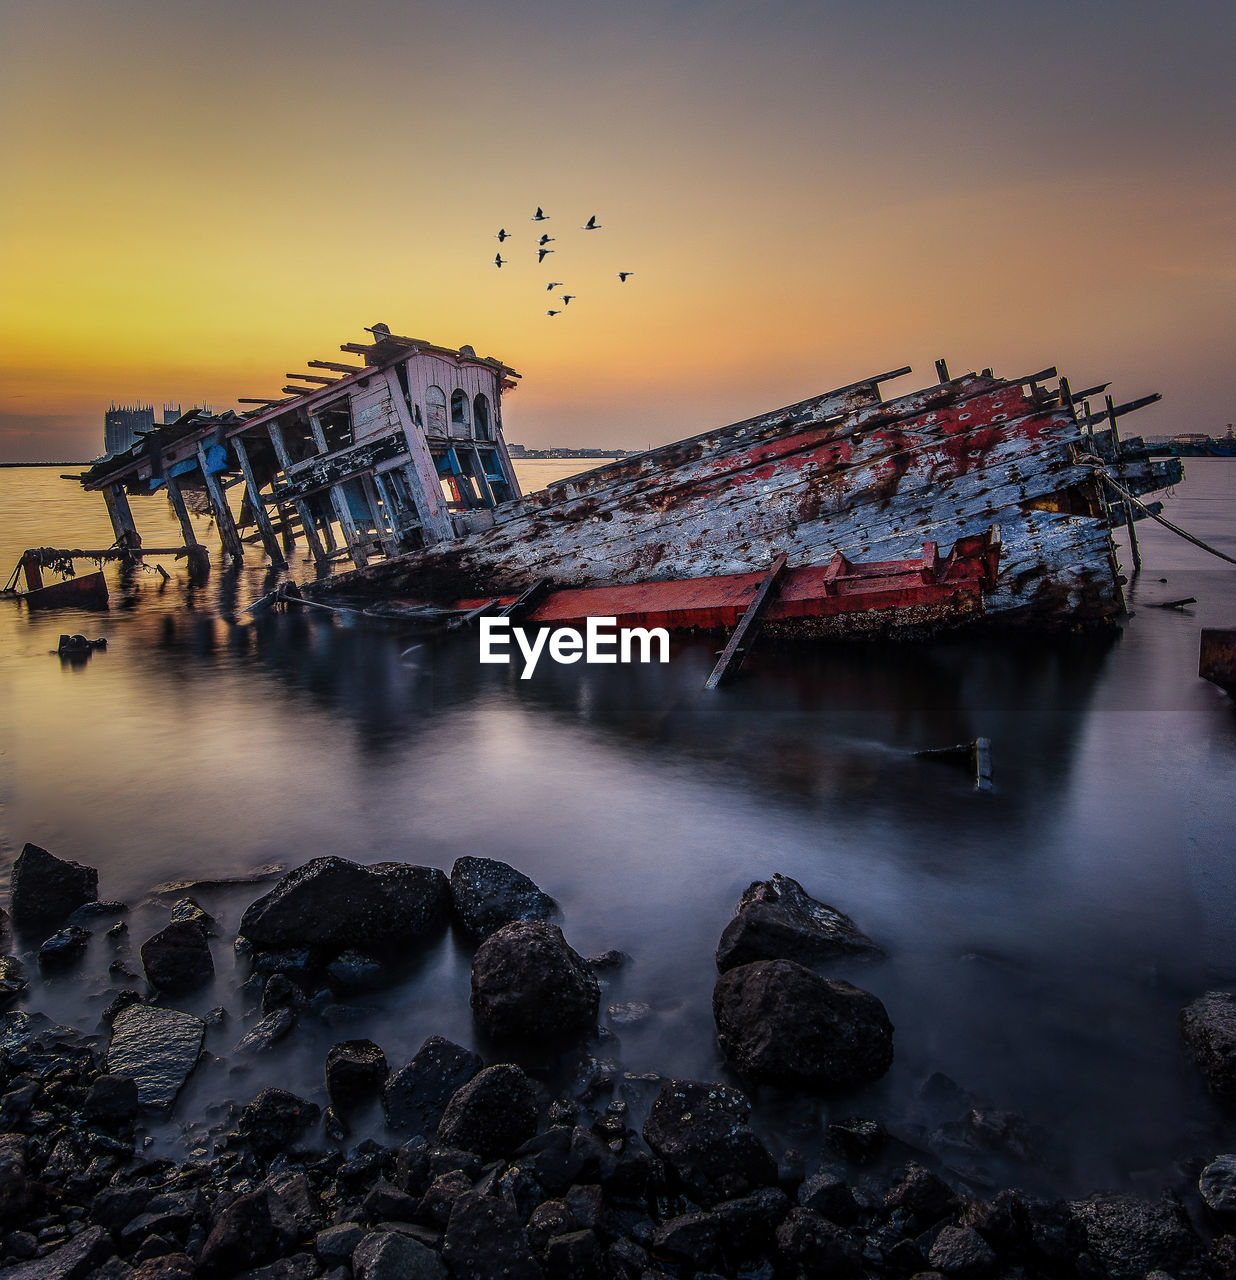 Ship wreck in sea against sky during sunset